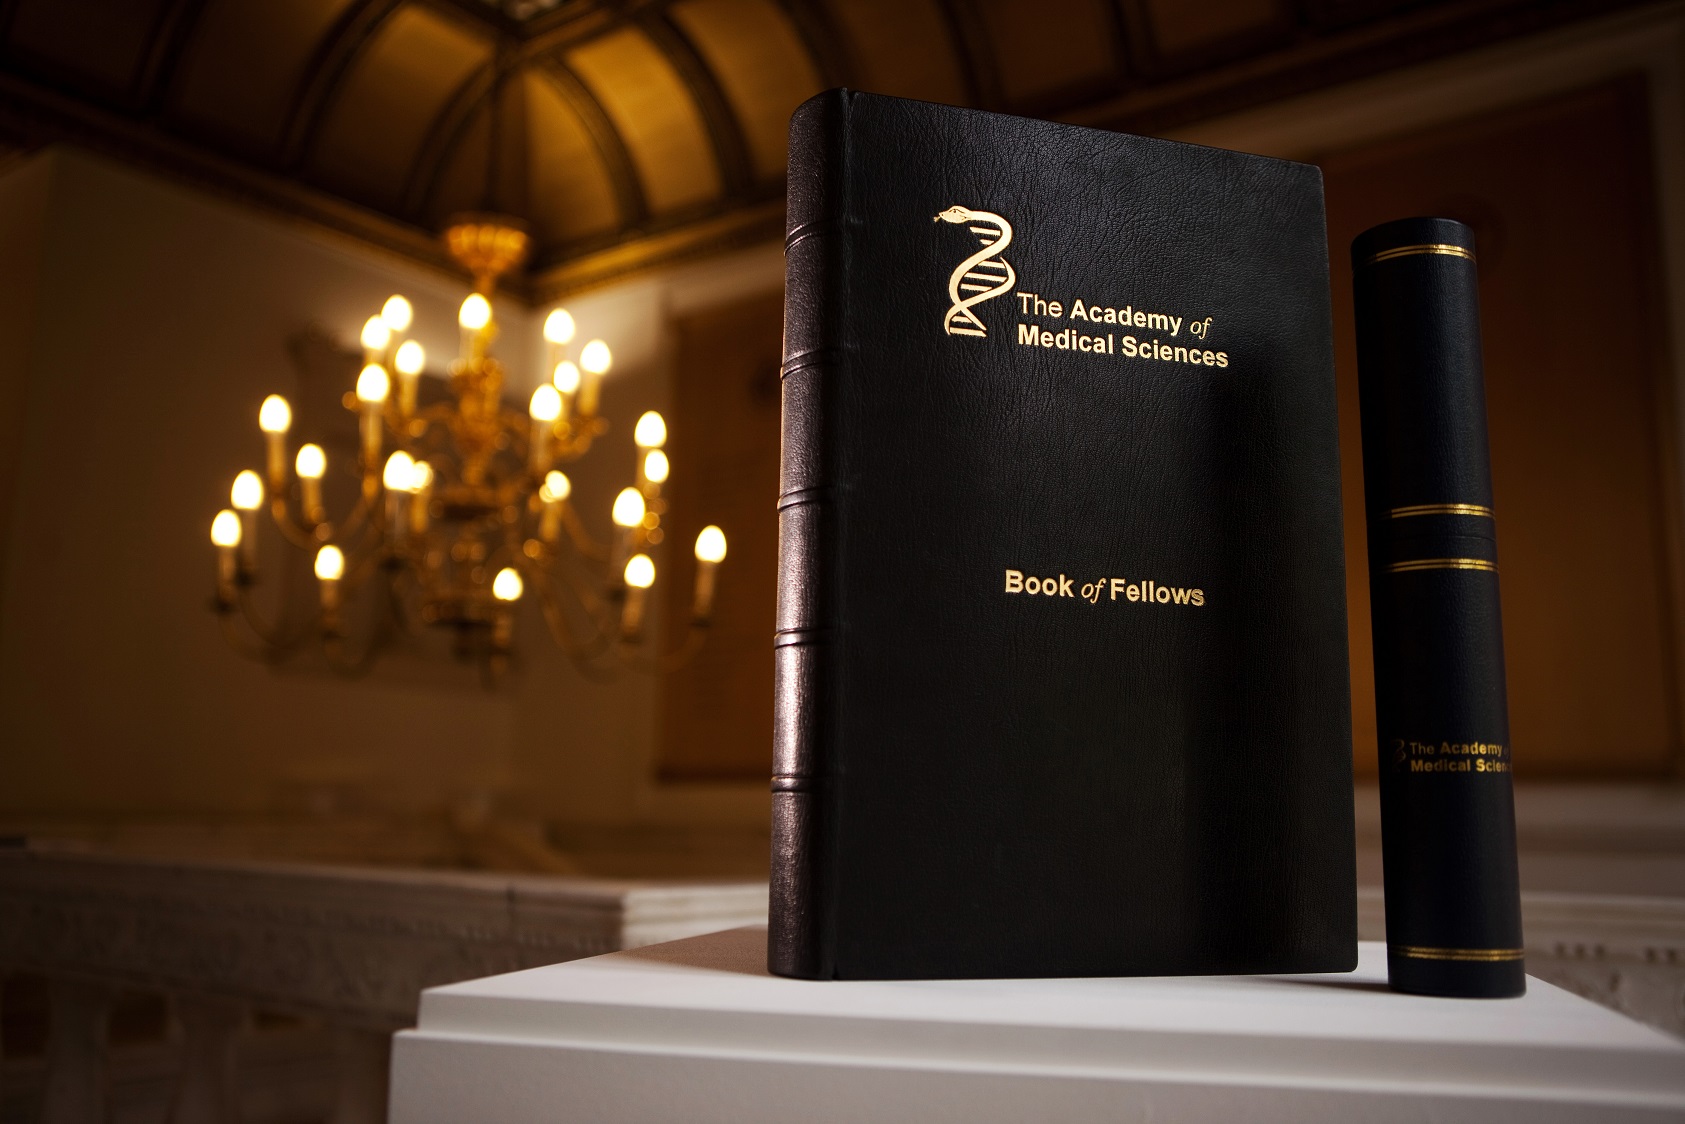 Academy of Medical Sciences 'Book of Fellows' standing on a table with chandelier in background. Credit Big T Images for Academy of Medical Sciences